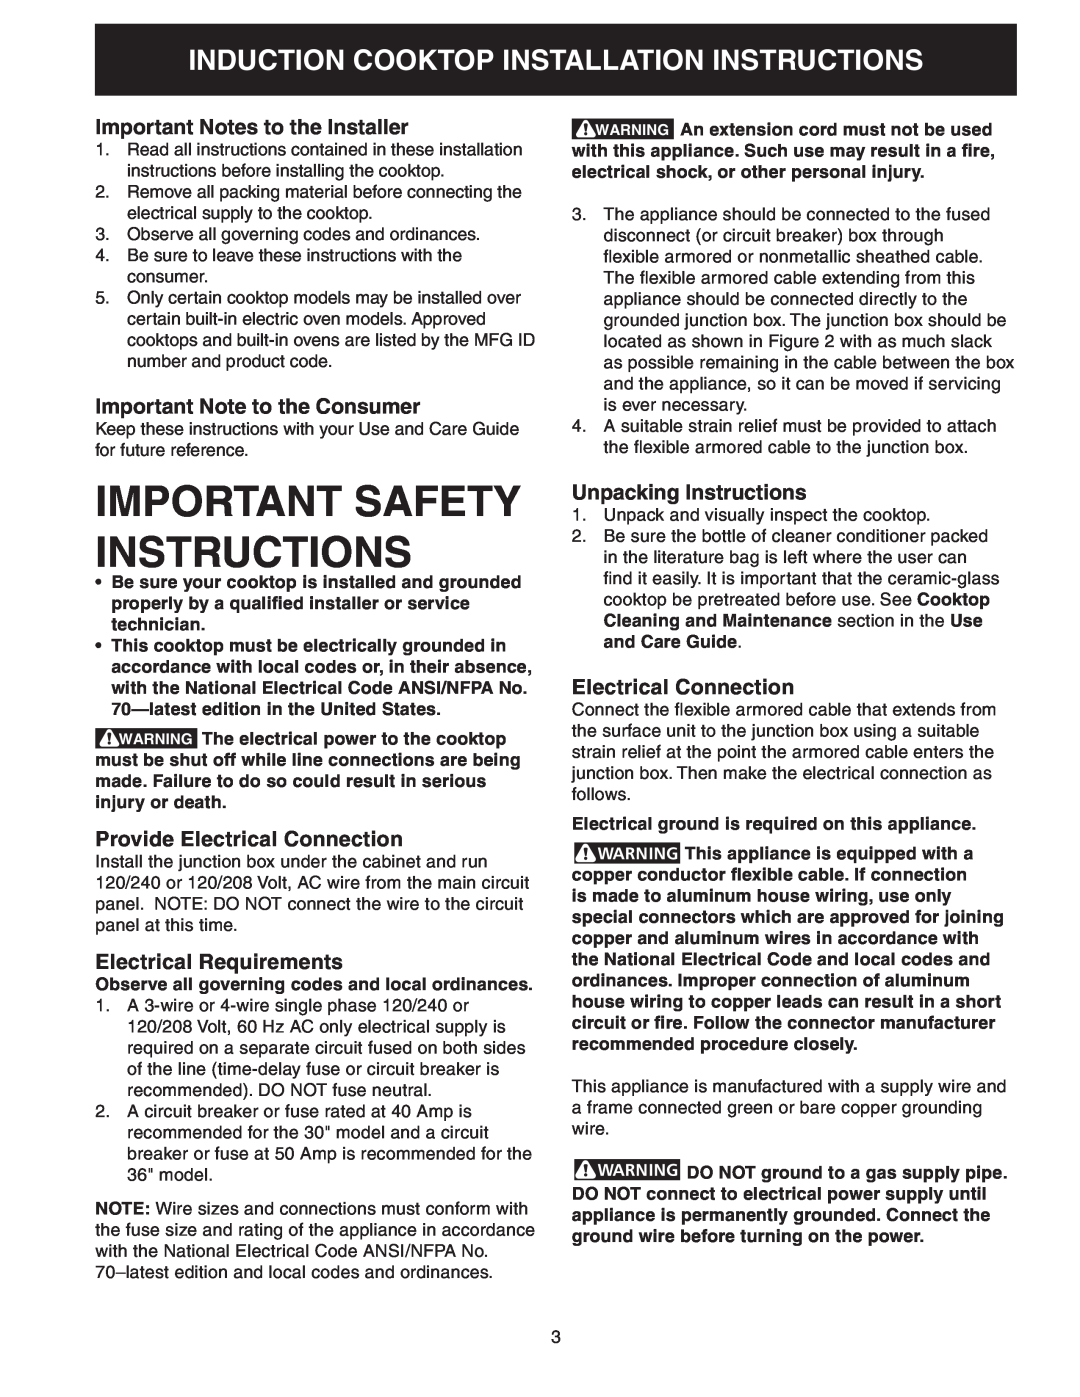 Frigidaire 318205412 Important Notes to the Installer, Important Note to the Consumer, Provide Electrical Connection 